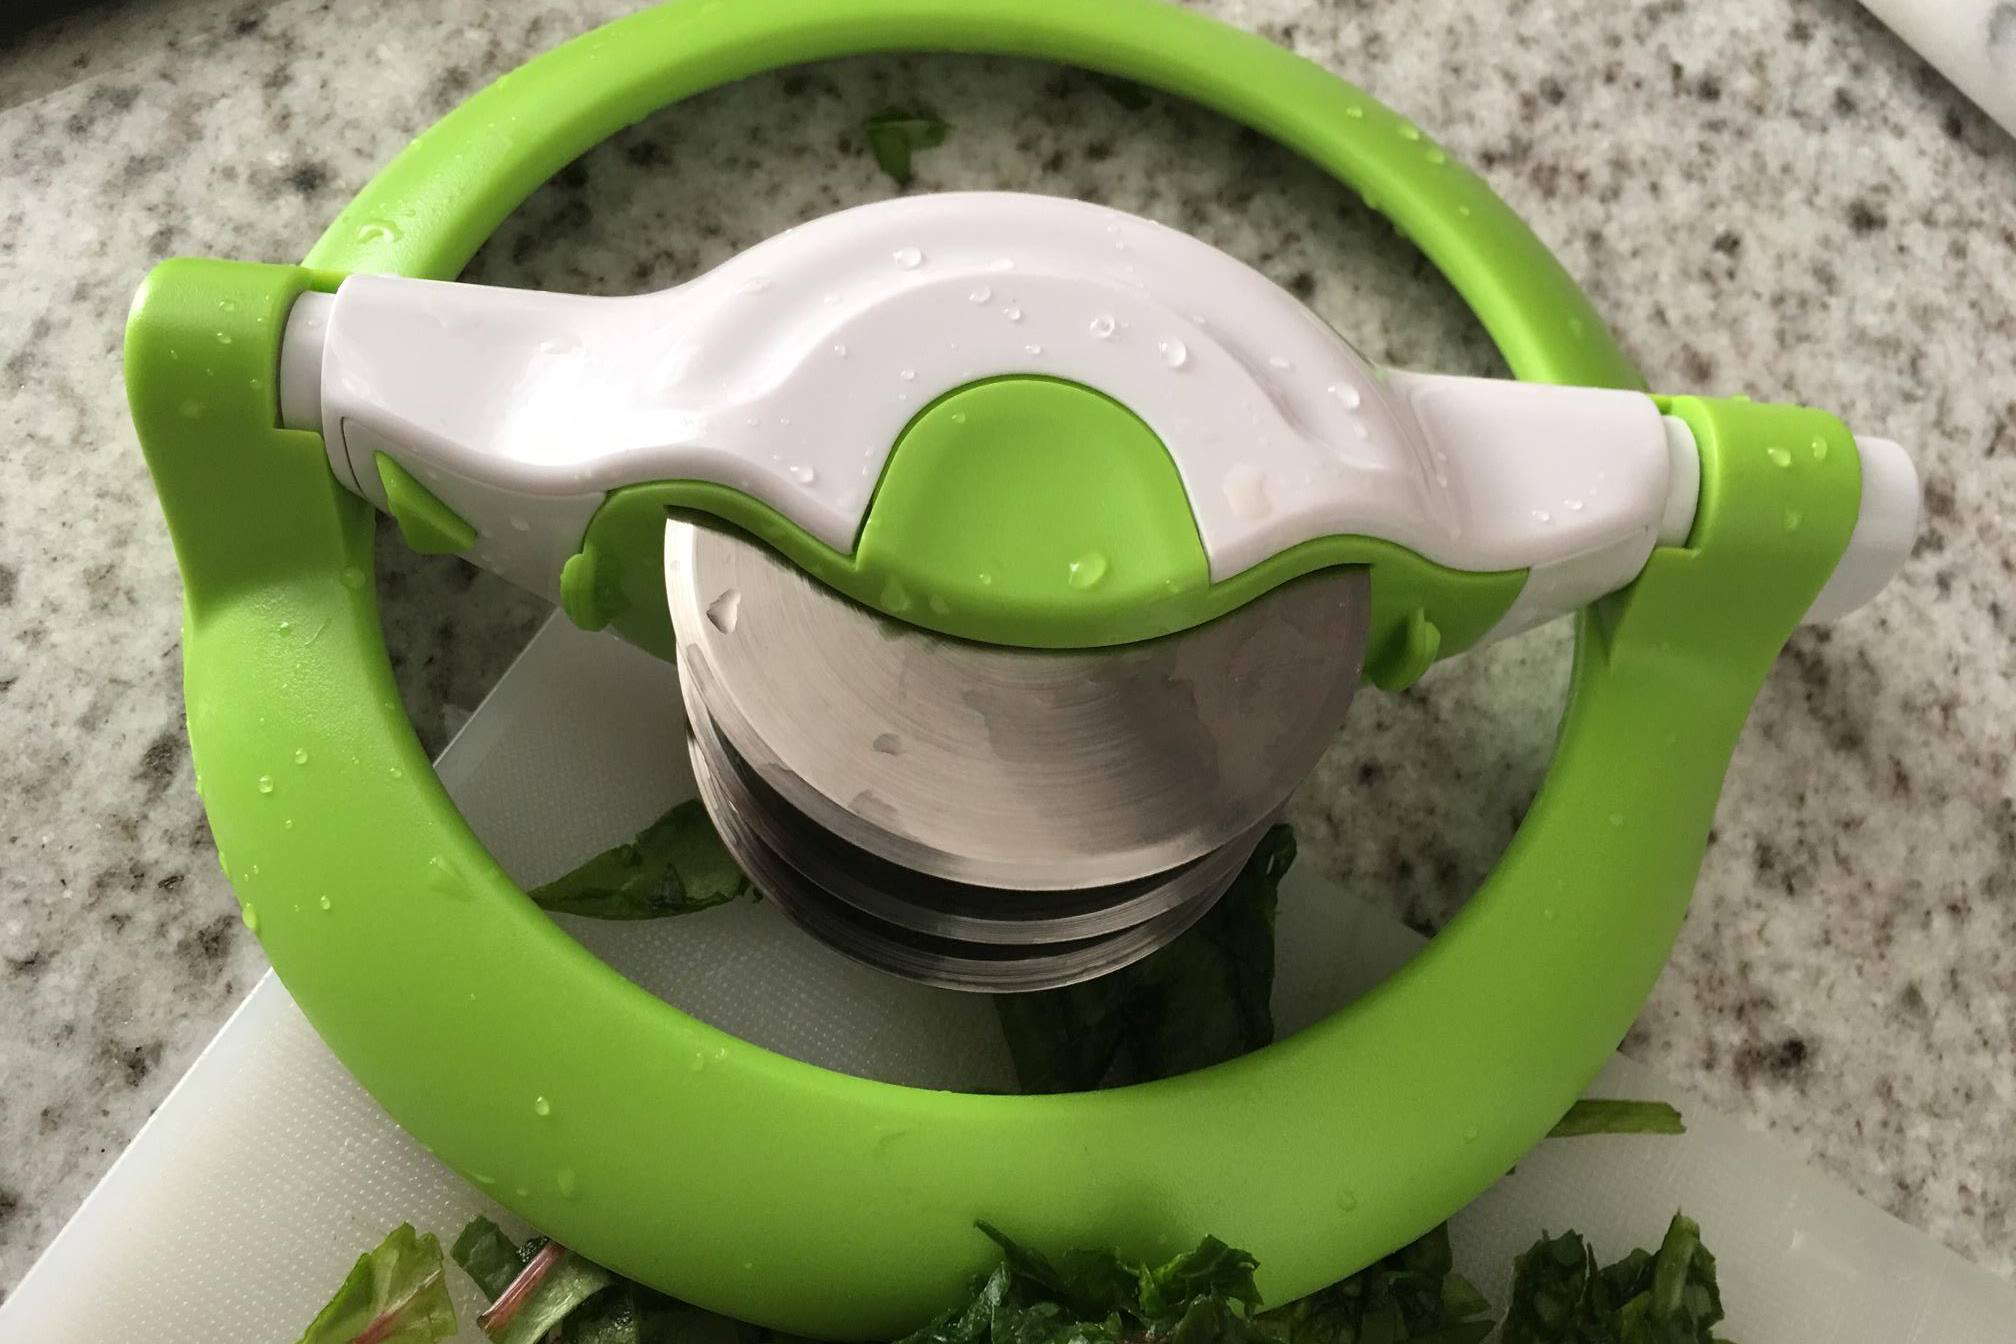 A Tool that Makes Mincing Fresh Herbs Easy - Food & Nutrition Magazine